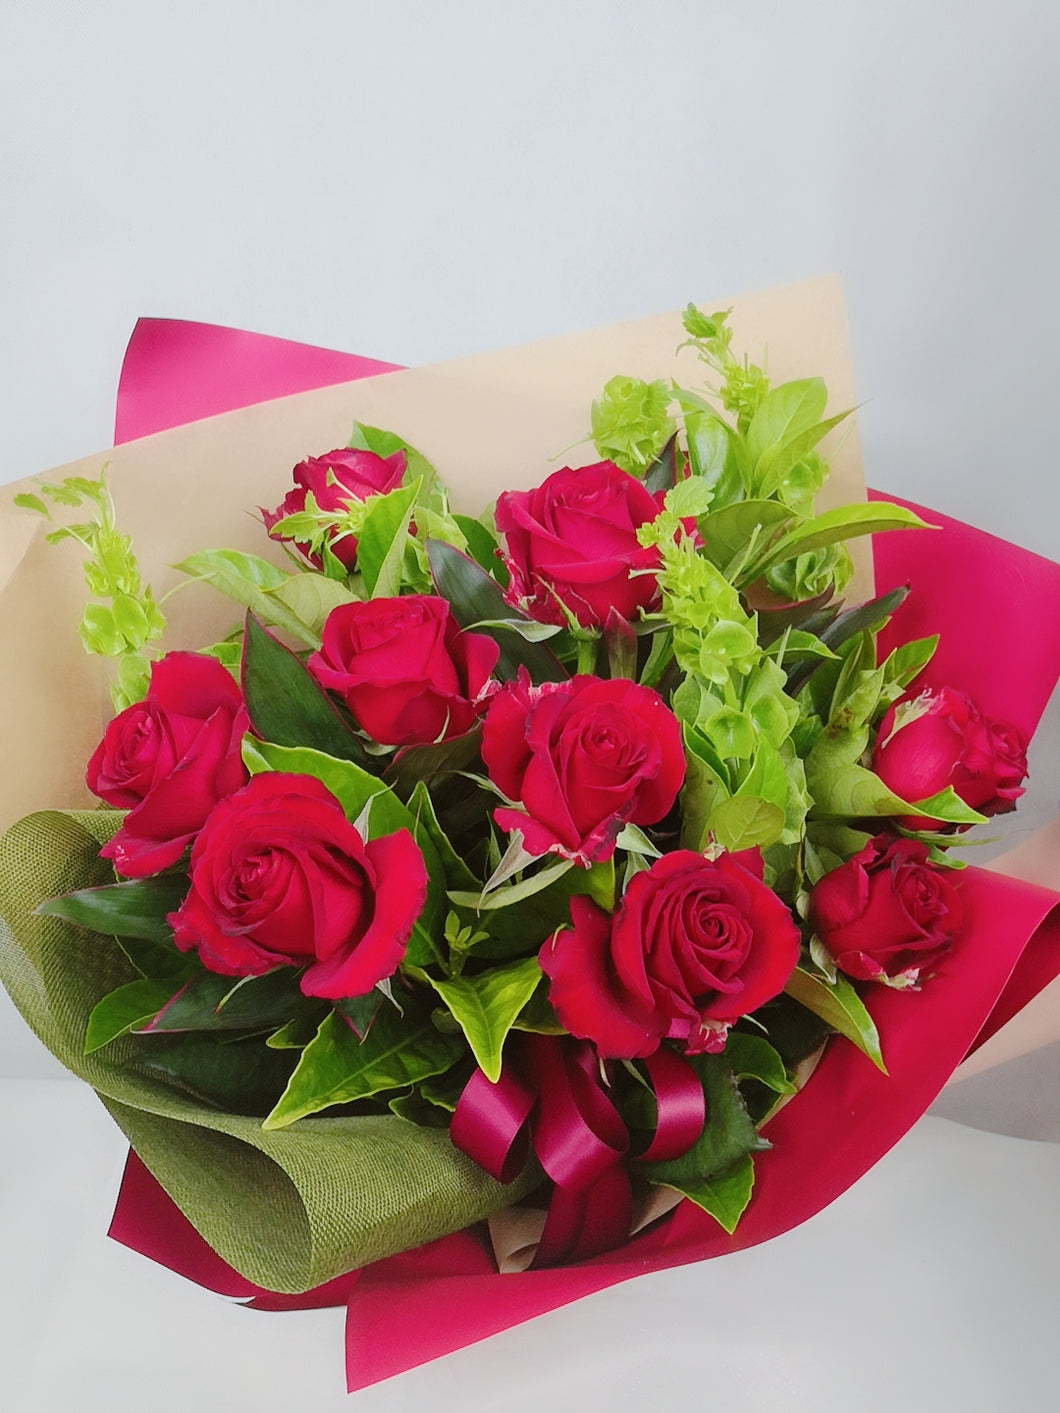 Red Rose bouquet